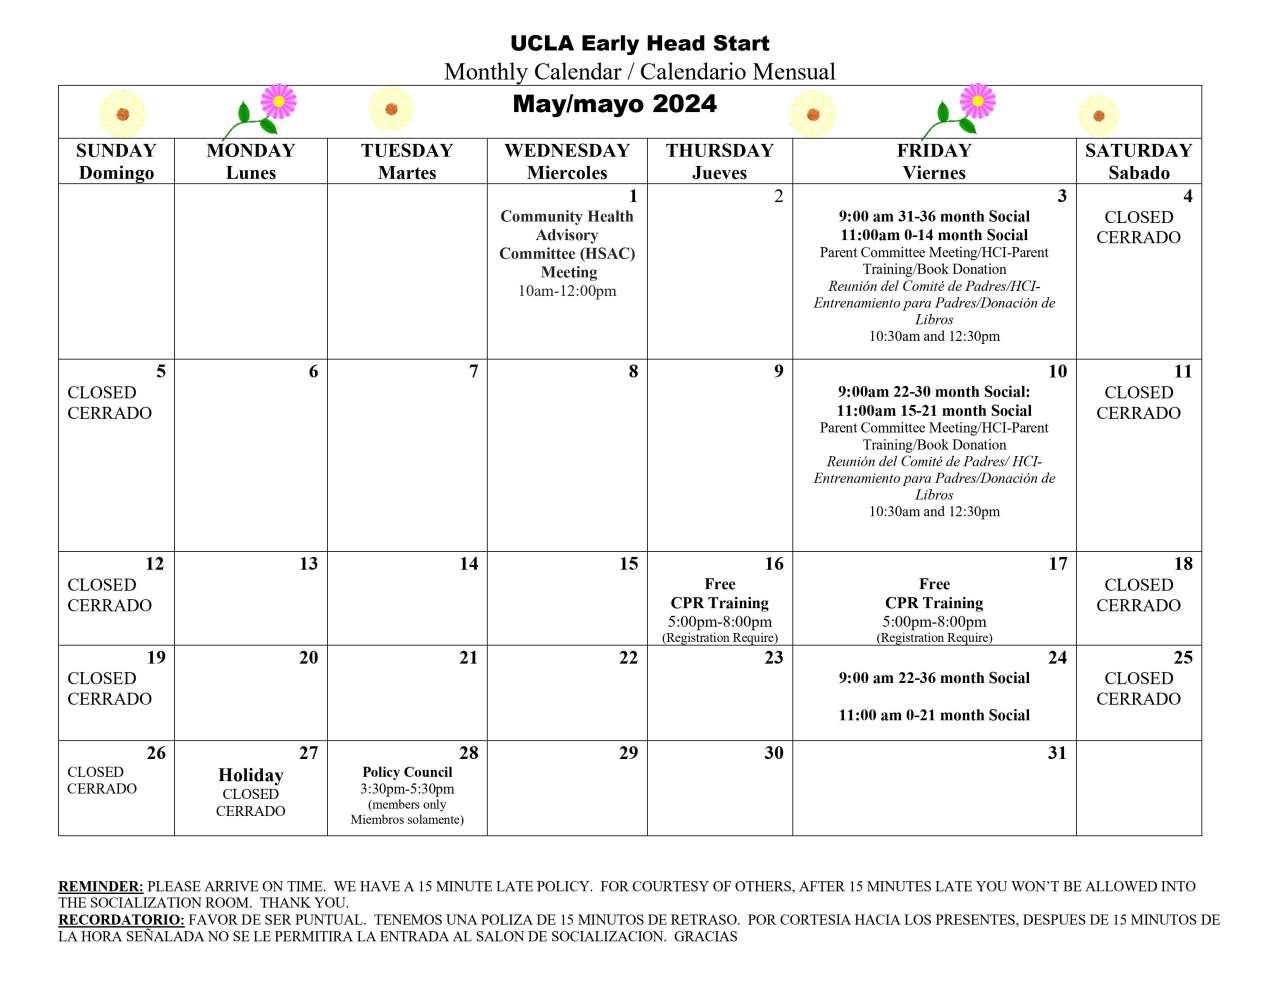 UCLA Early Head Start May Calendar of Events